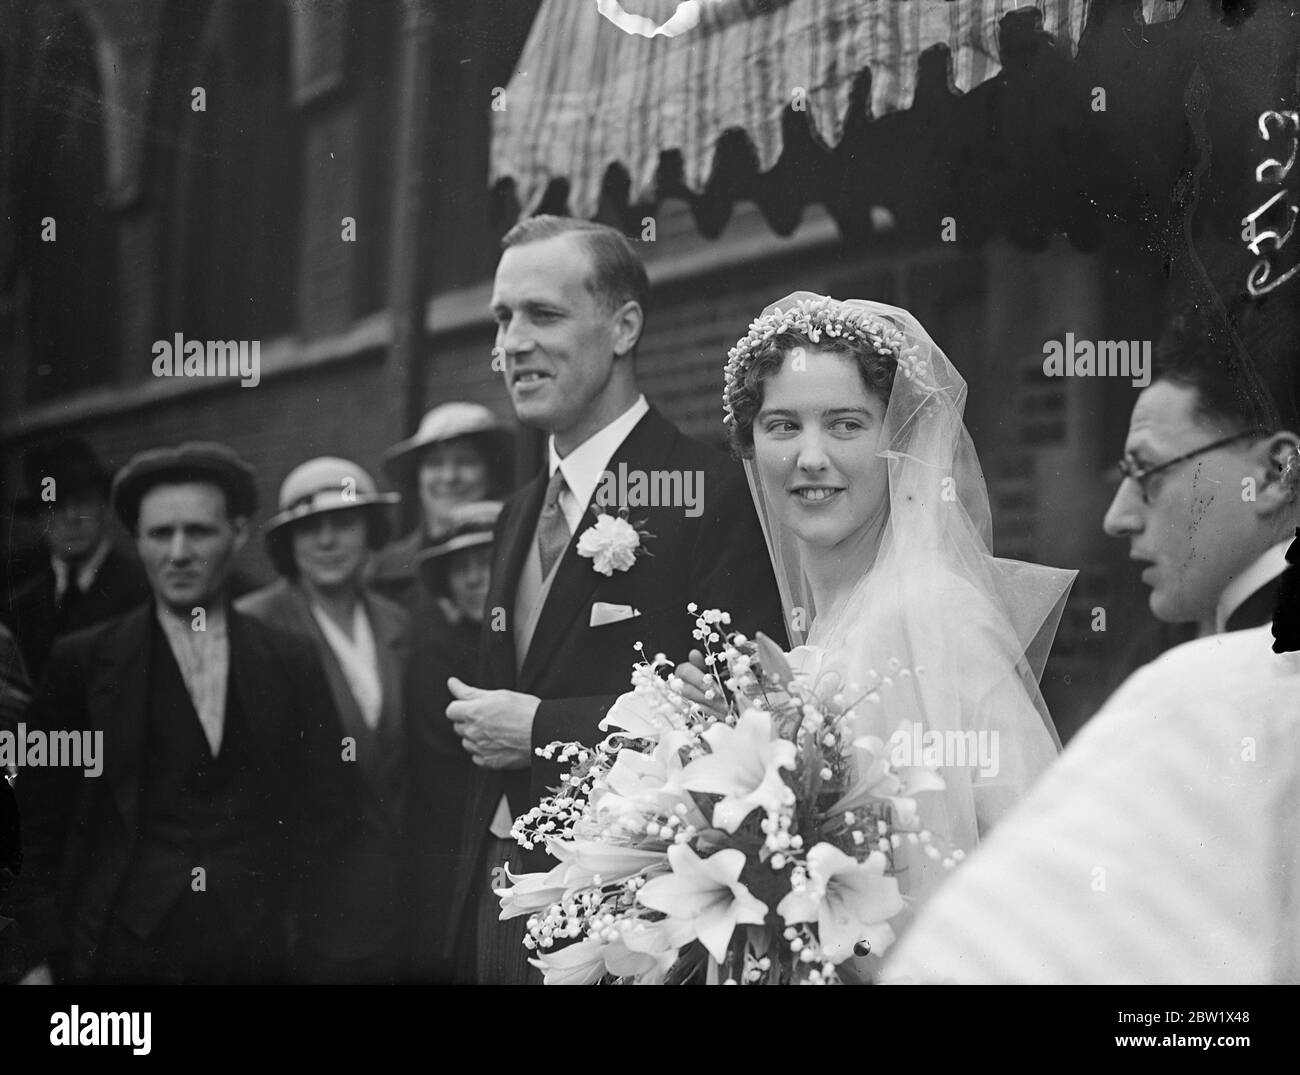 Married at the same time as Duke of Windsor. London wedding rush. Among the rush of London couples who arrange their wedding to take place at the same time as that of the Duke and Duchess of Windsor were Mr J. G. Lockhart and Miss M. C. M. Gordon daughter of the late Brigadier General A. F. Gordon D. S. O., who were married at St Mary's, Cadogan Square. Photo Shows: the bride and bridegroom after the ceremony. 3 June 1937 Stock Photo